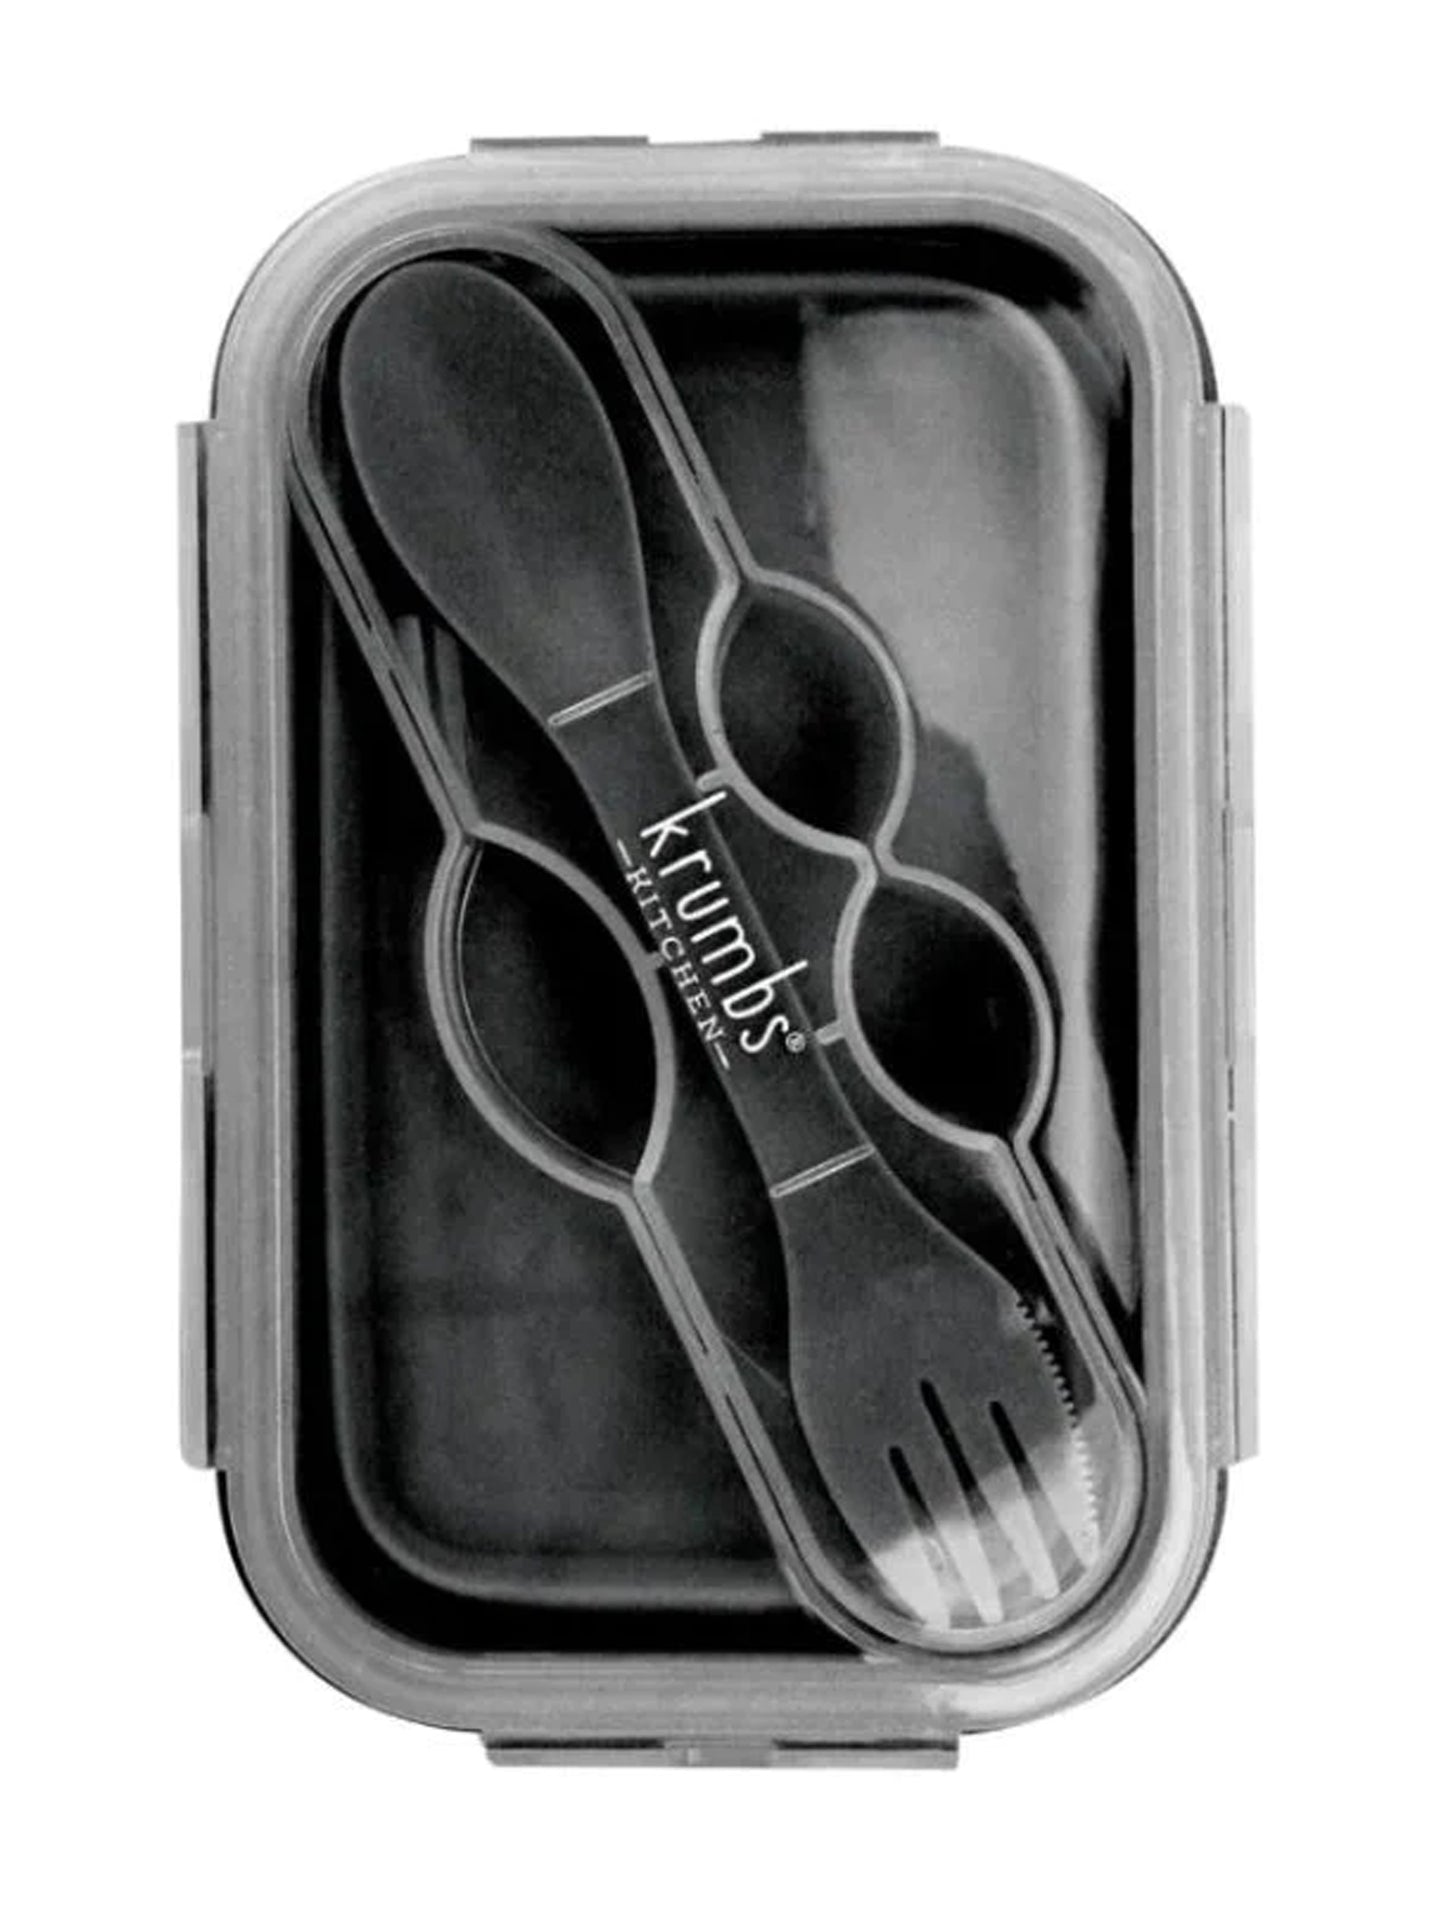 Krumbs collapsible silicone lunch container DARK GRAY!